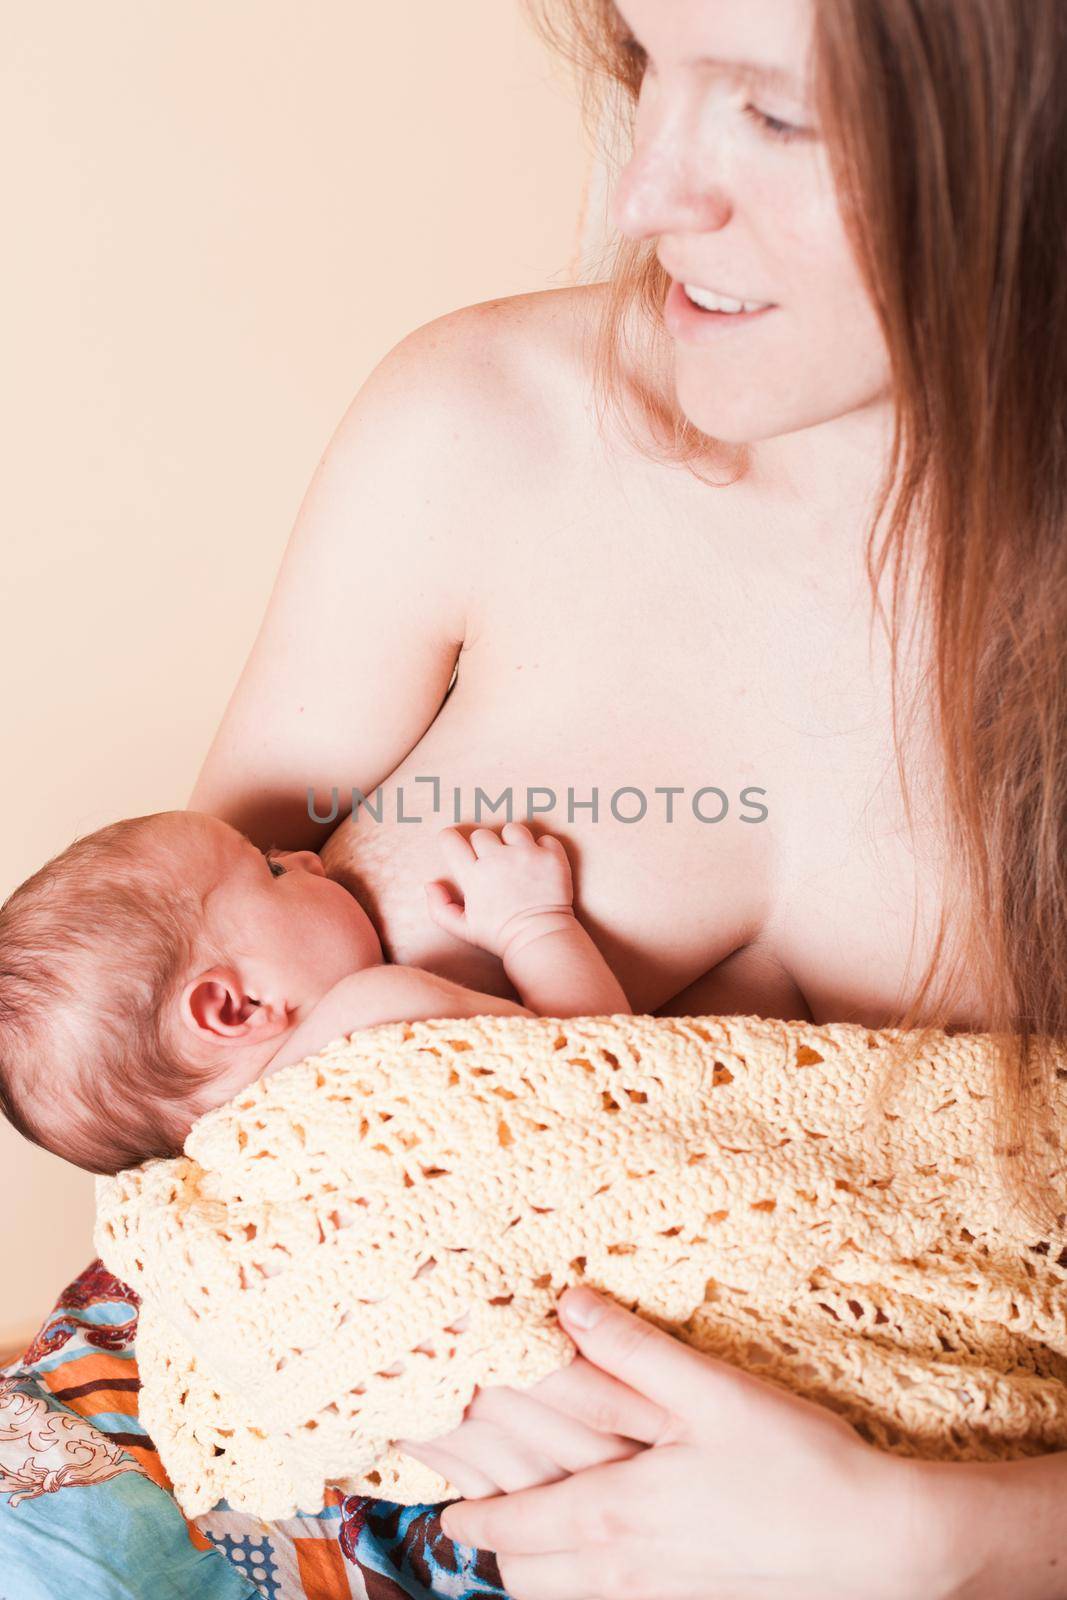 Mother with her newborn nursing baby, sitting on a draws rocking